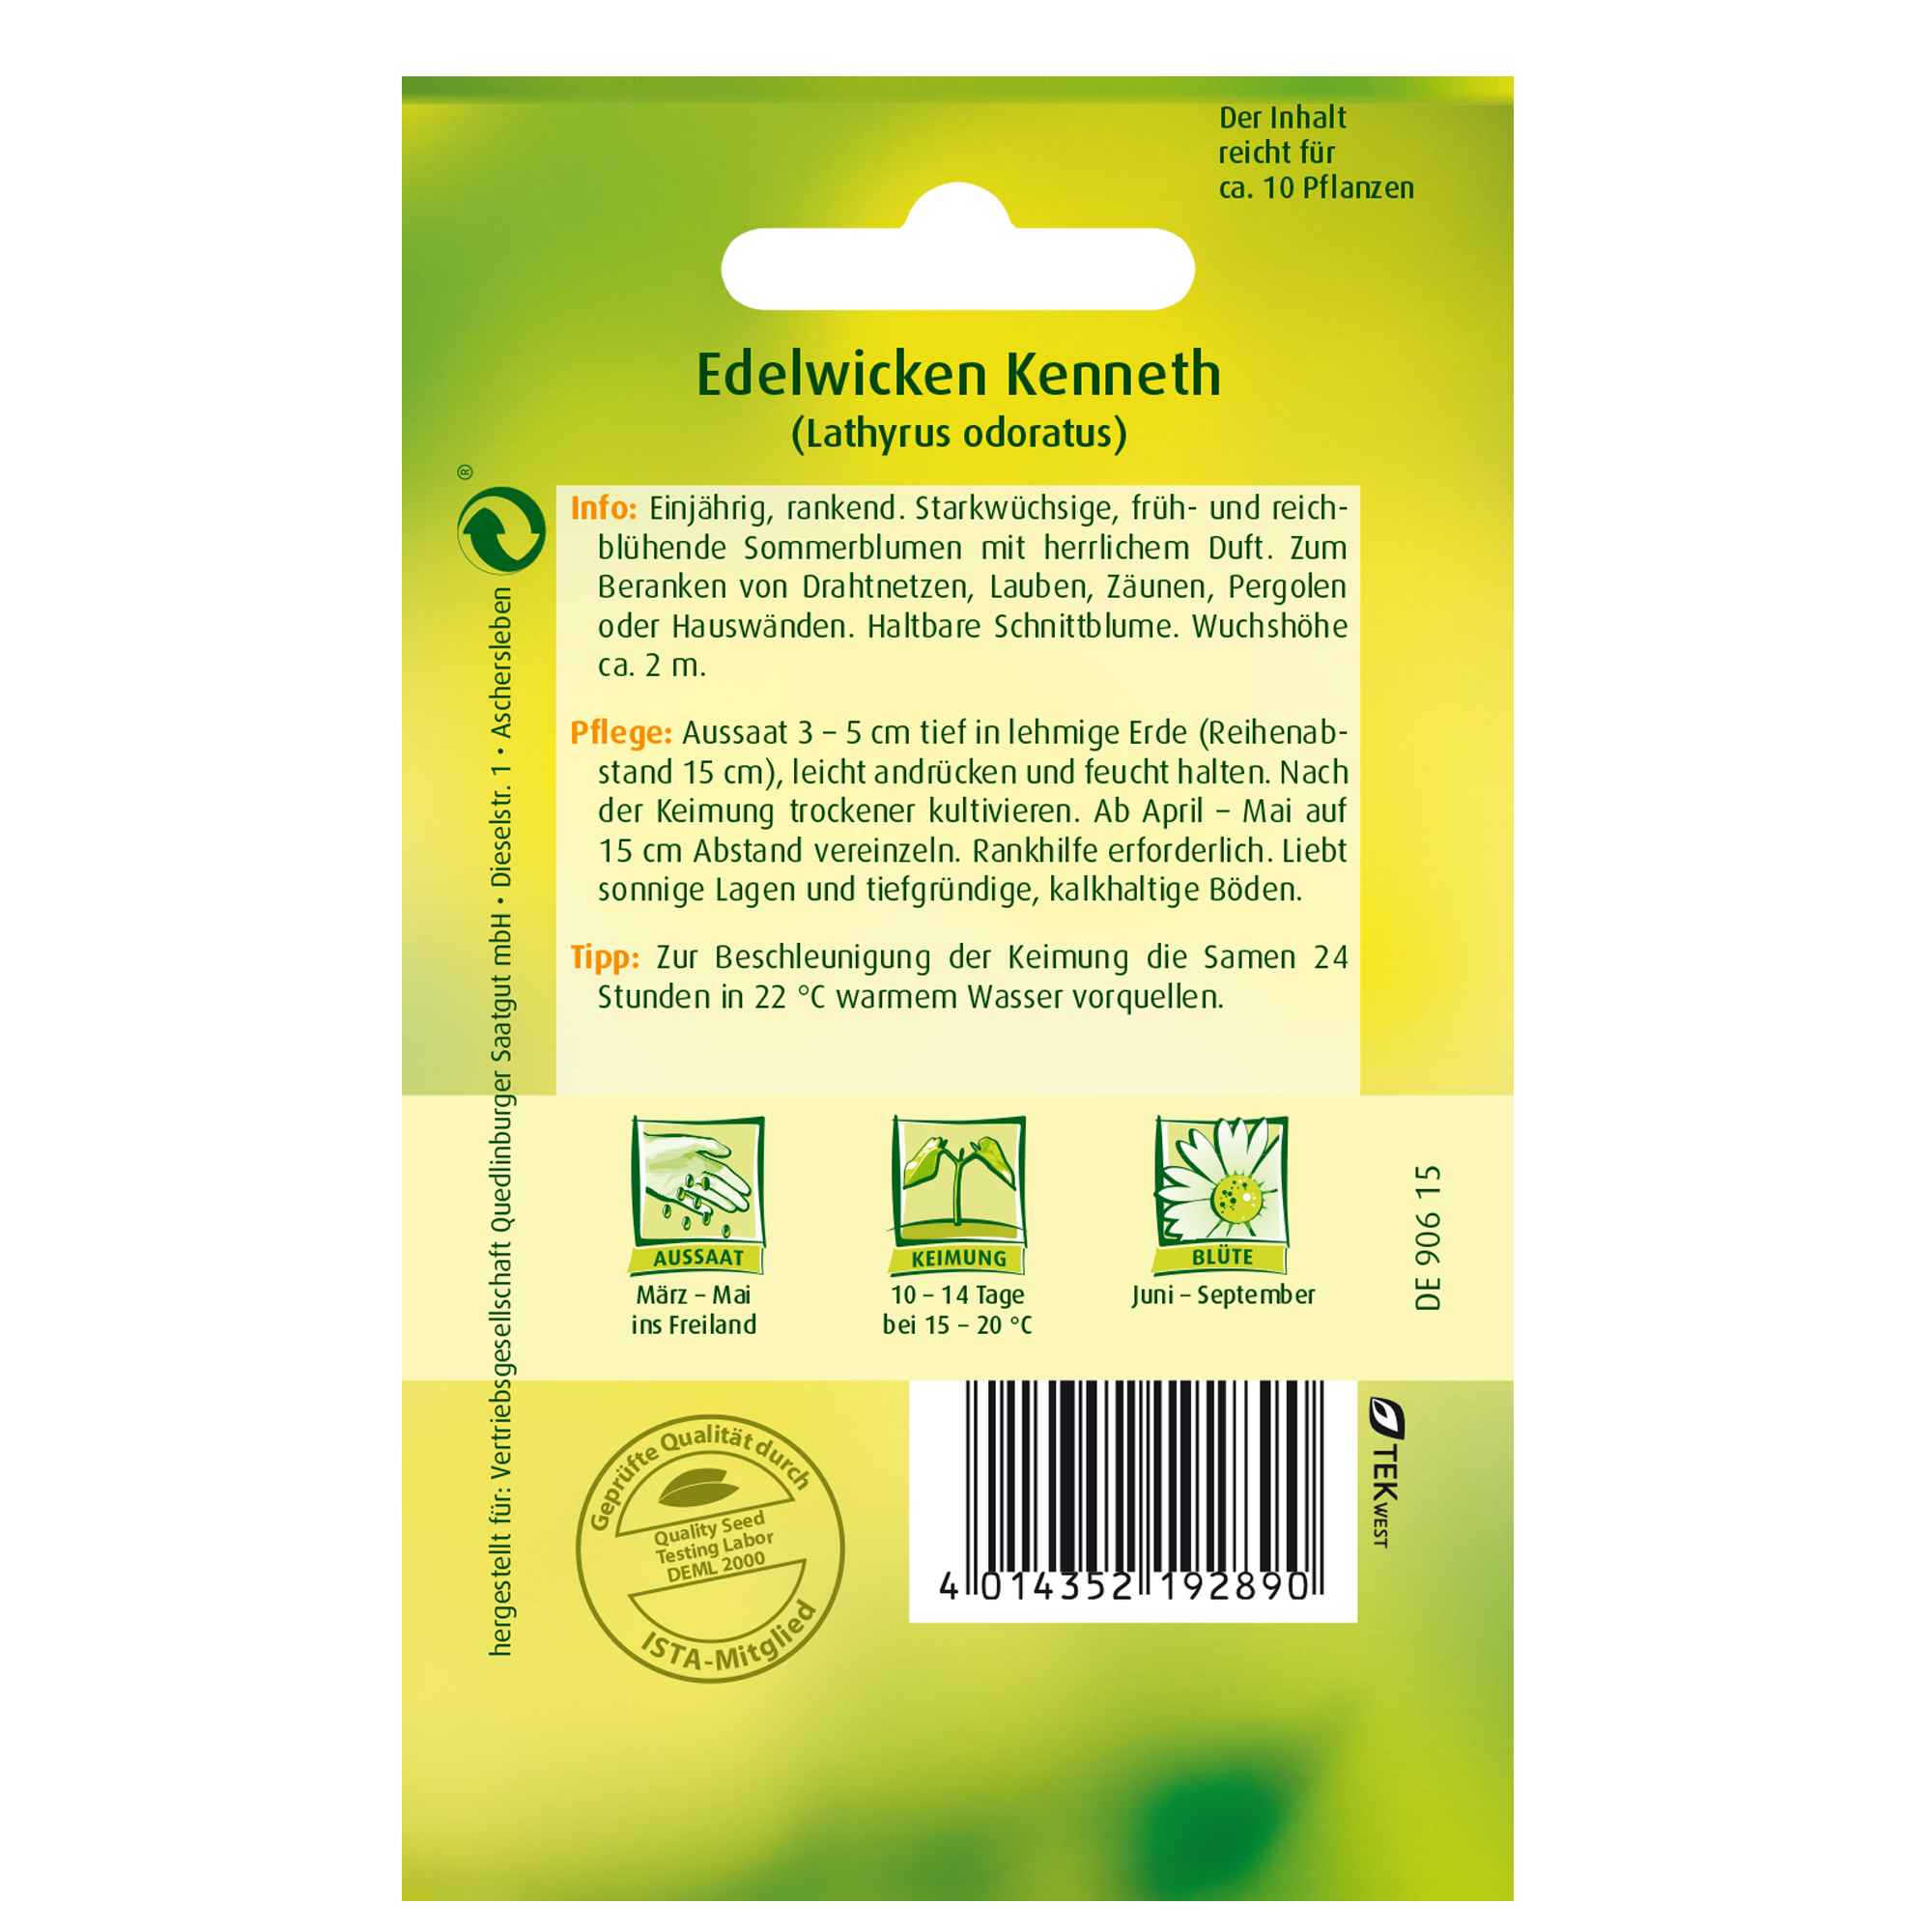 Edelwicken 'Kenneth' + product picture